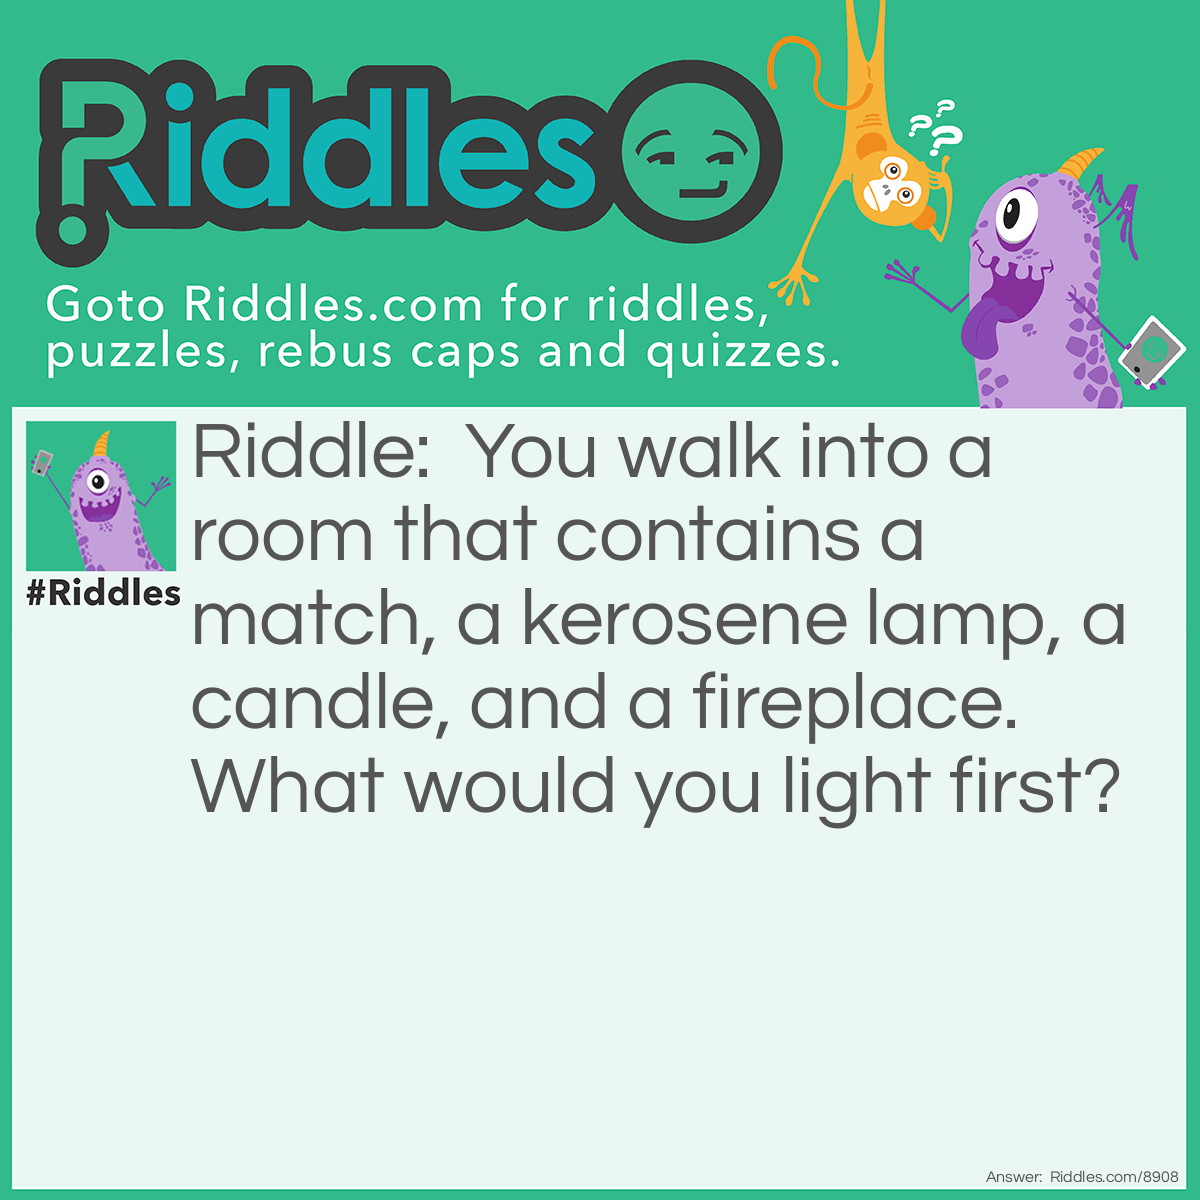 Riddle: You walk into a room that contains a match, a kerosene lamp, a candle, and a fireplace. What would you light first? Answer: Answer: The match.